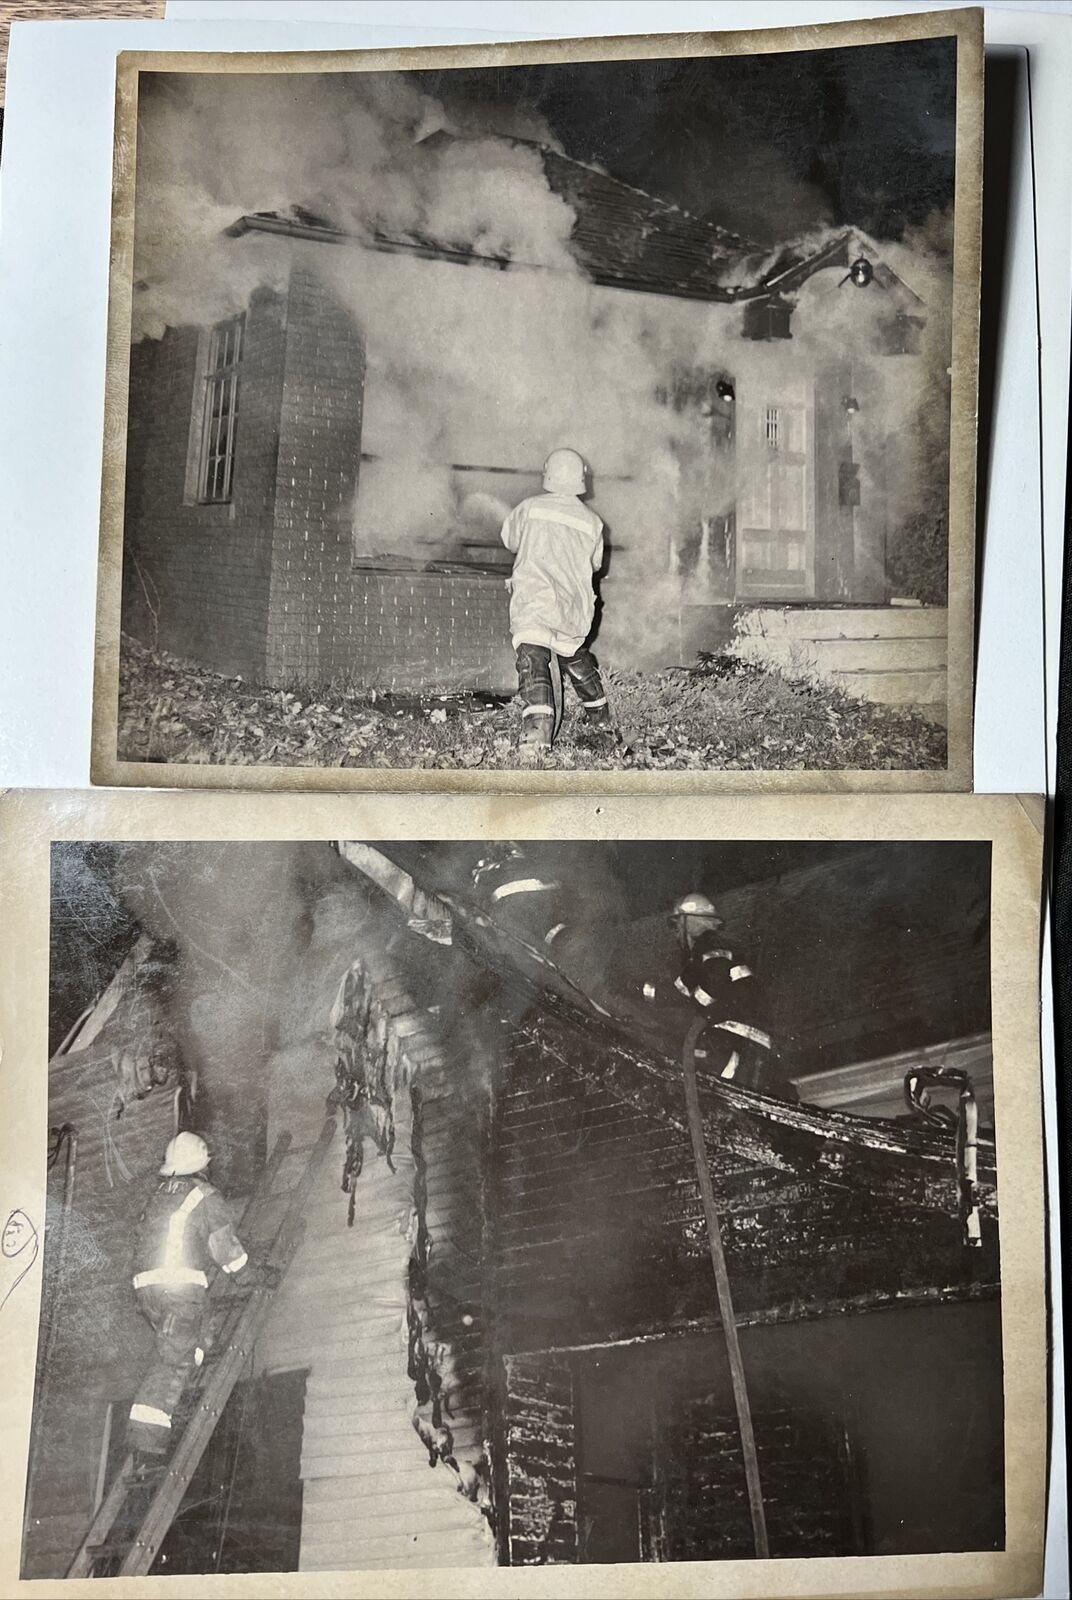 Lot of 2 lg vintage 1950s FIREFIGHTERS fireman Burning House Ladders Fire Photo